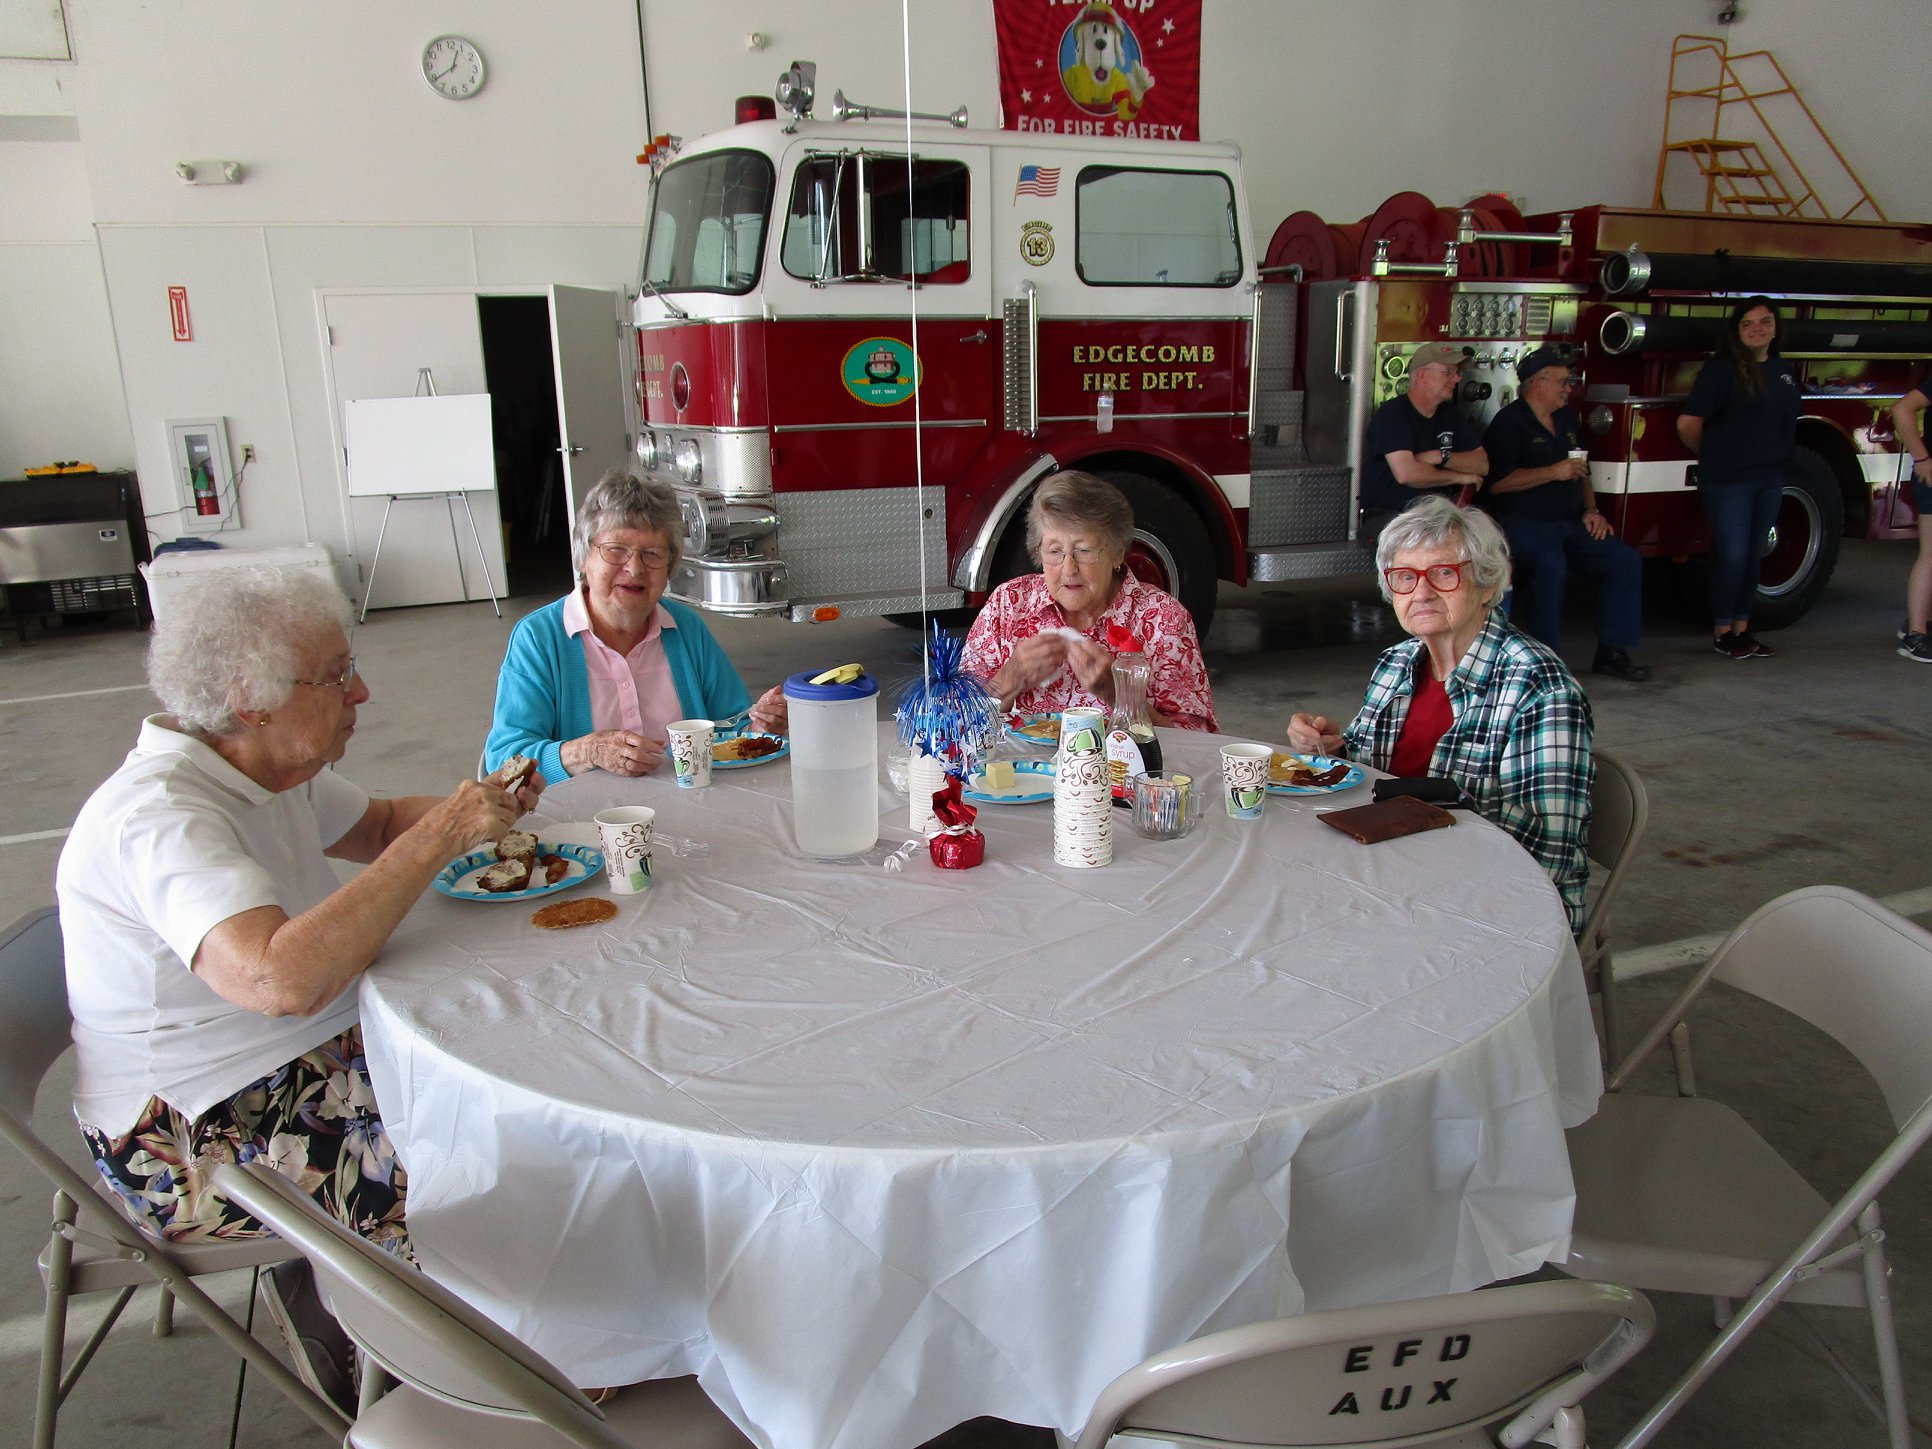 People eating around a table inside the fire department